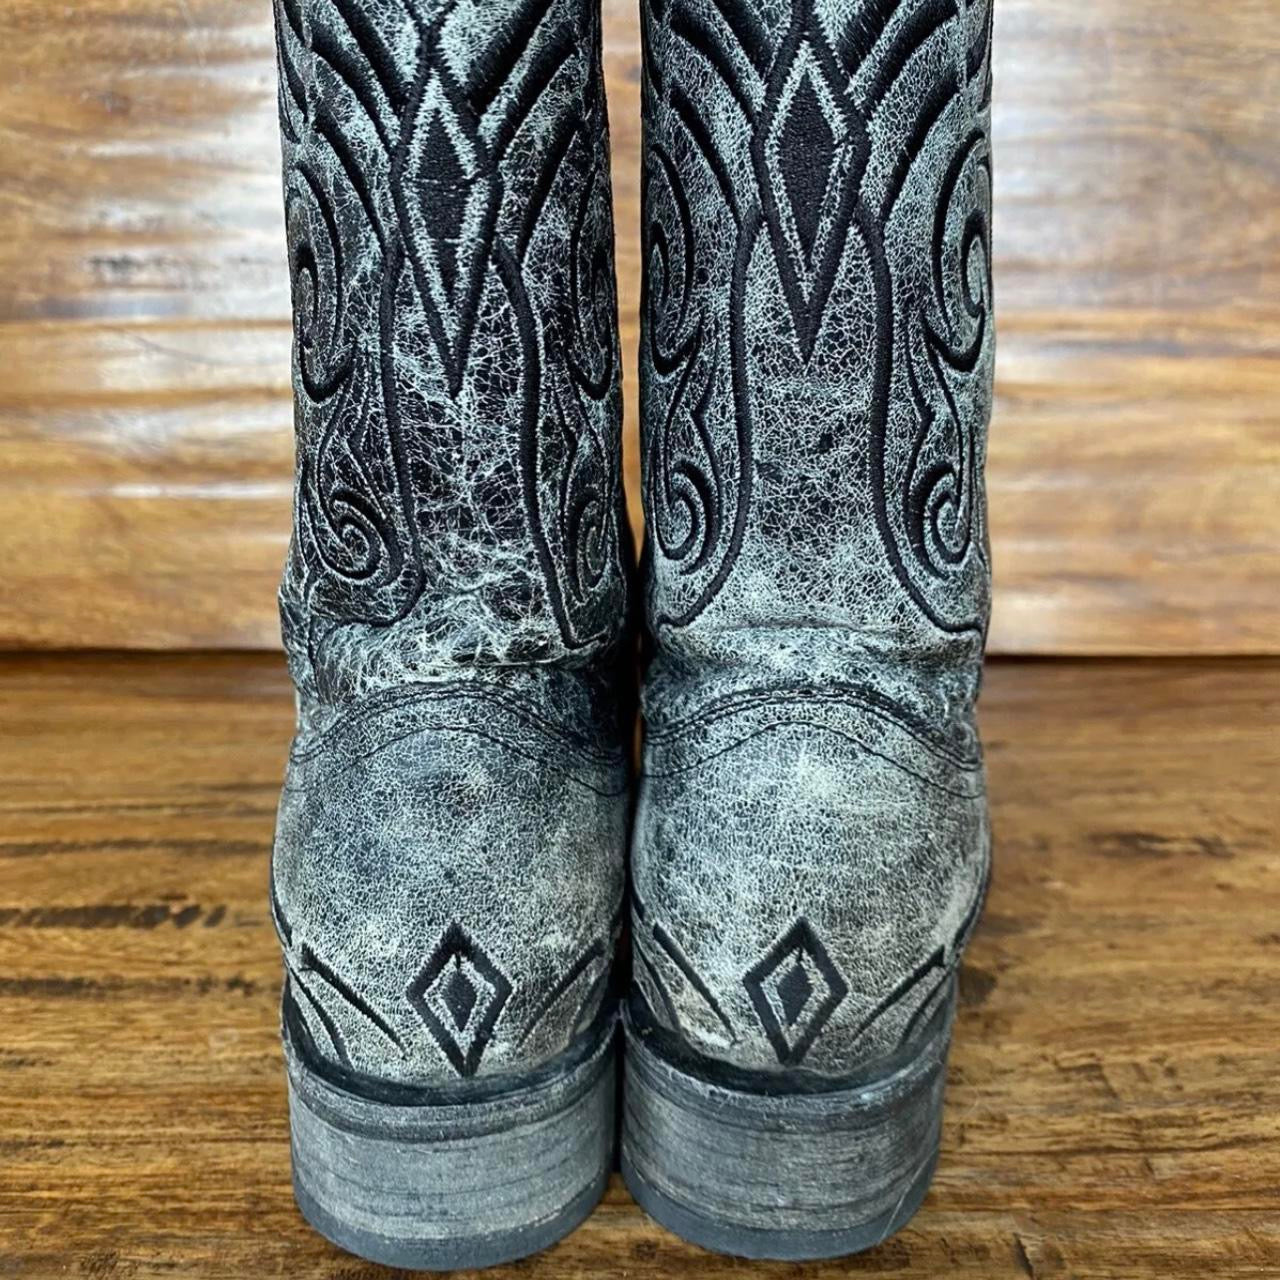 VINTAGE EMBROIDERED URBAN WESTERN BOOTS